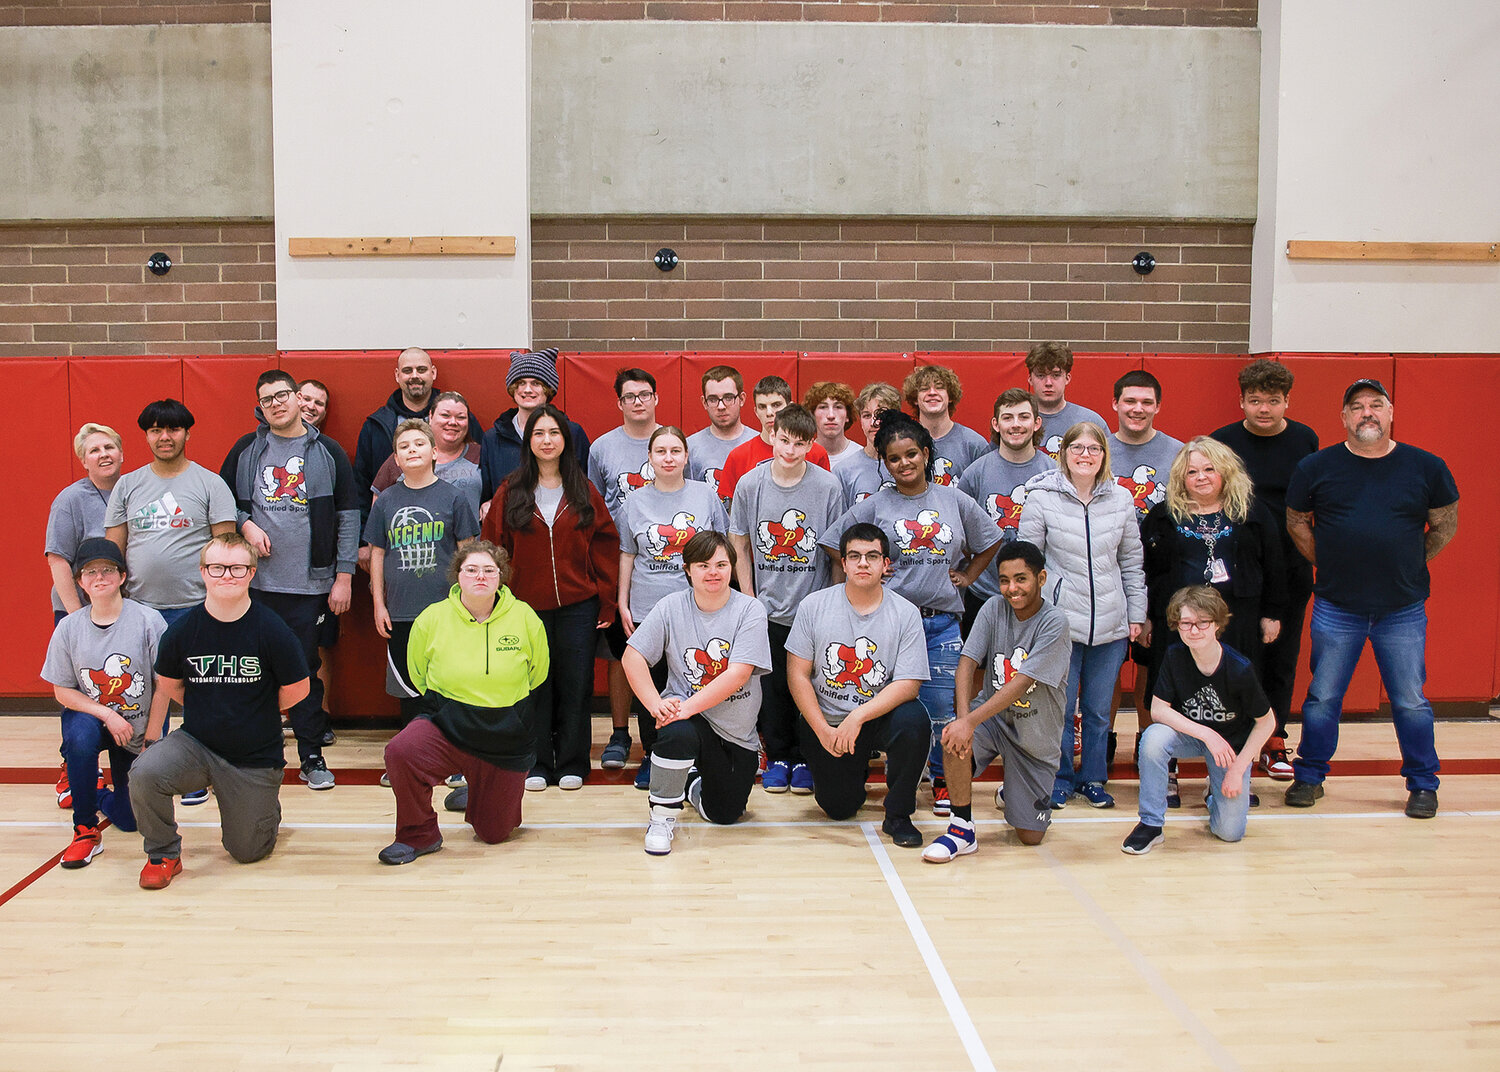 Prairie High School unified basketball athletes, partners, coaches and parents got together for a group photo after their Tuesday, Jan. 30 practice.